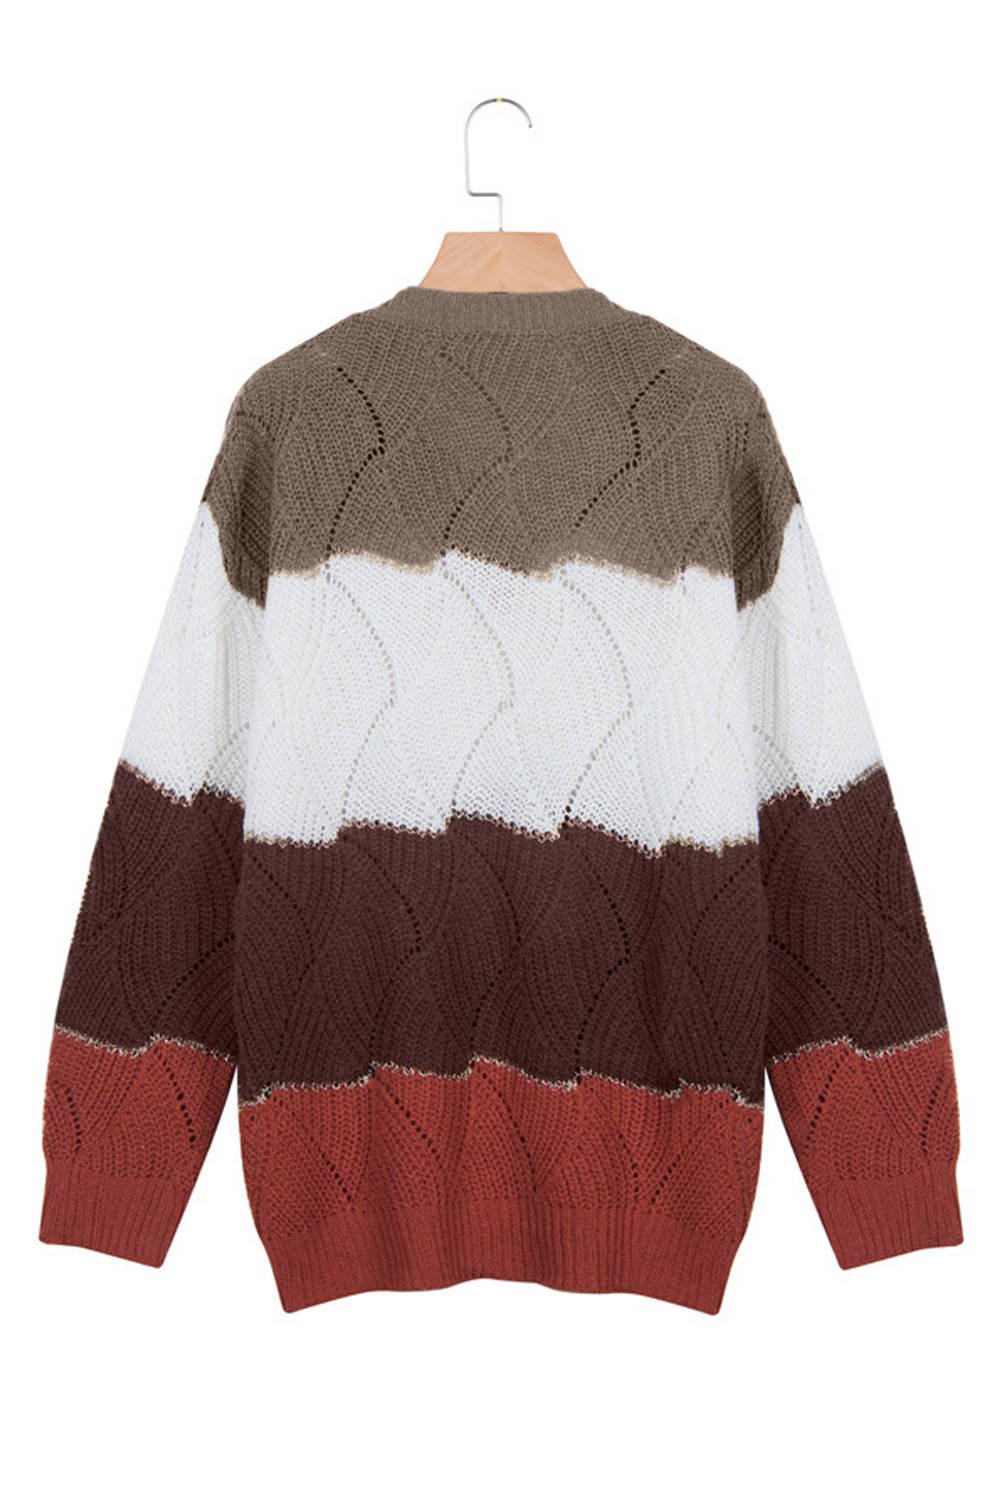 Brown V Neck Colorblock Textured Knit Sweater